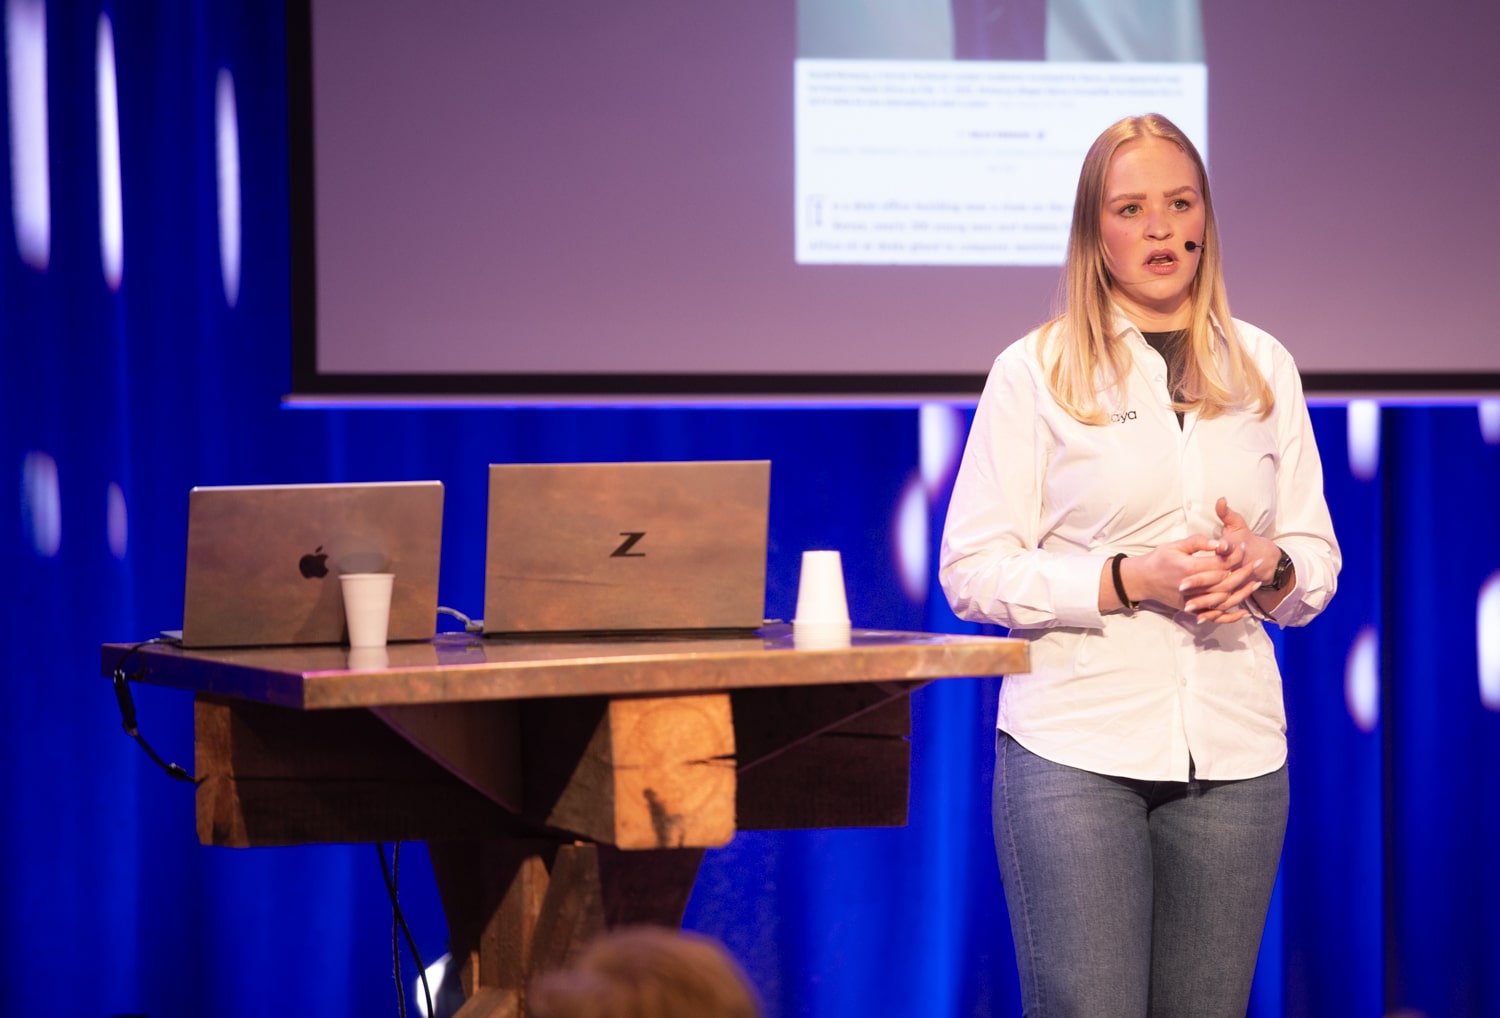 Nora Antonsen (on stage) is Co-Founder and CPO at Naya Development, a startup providing dignified employment to women in Indian slums to process and label data for use in AI. PHOTO: AI+ Stein Johnsen, ContentVideo